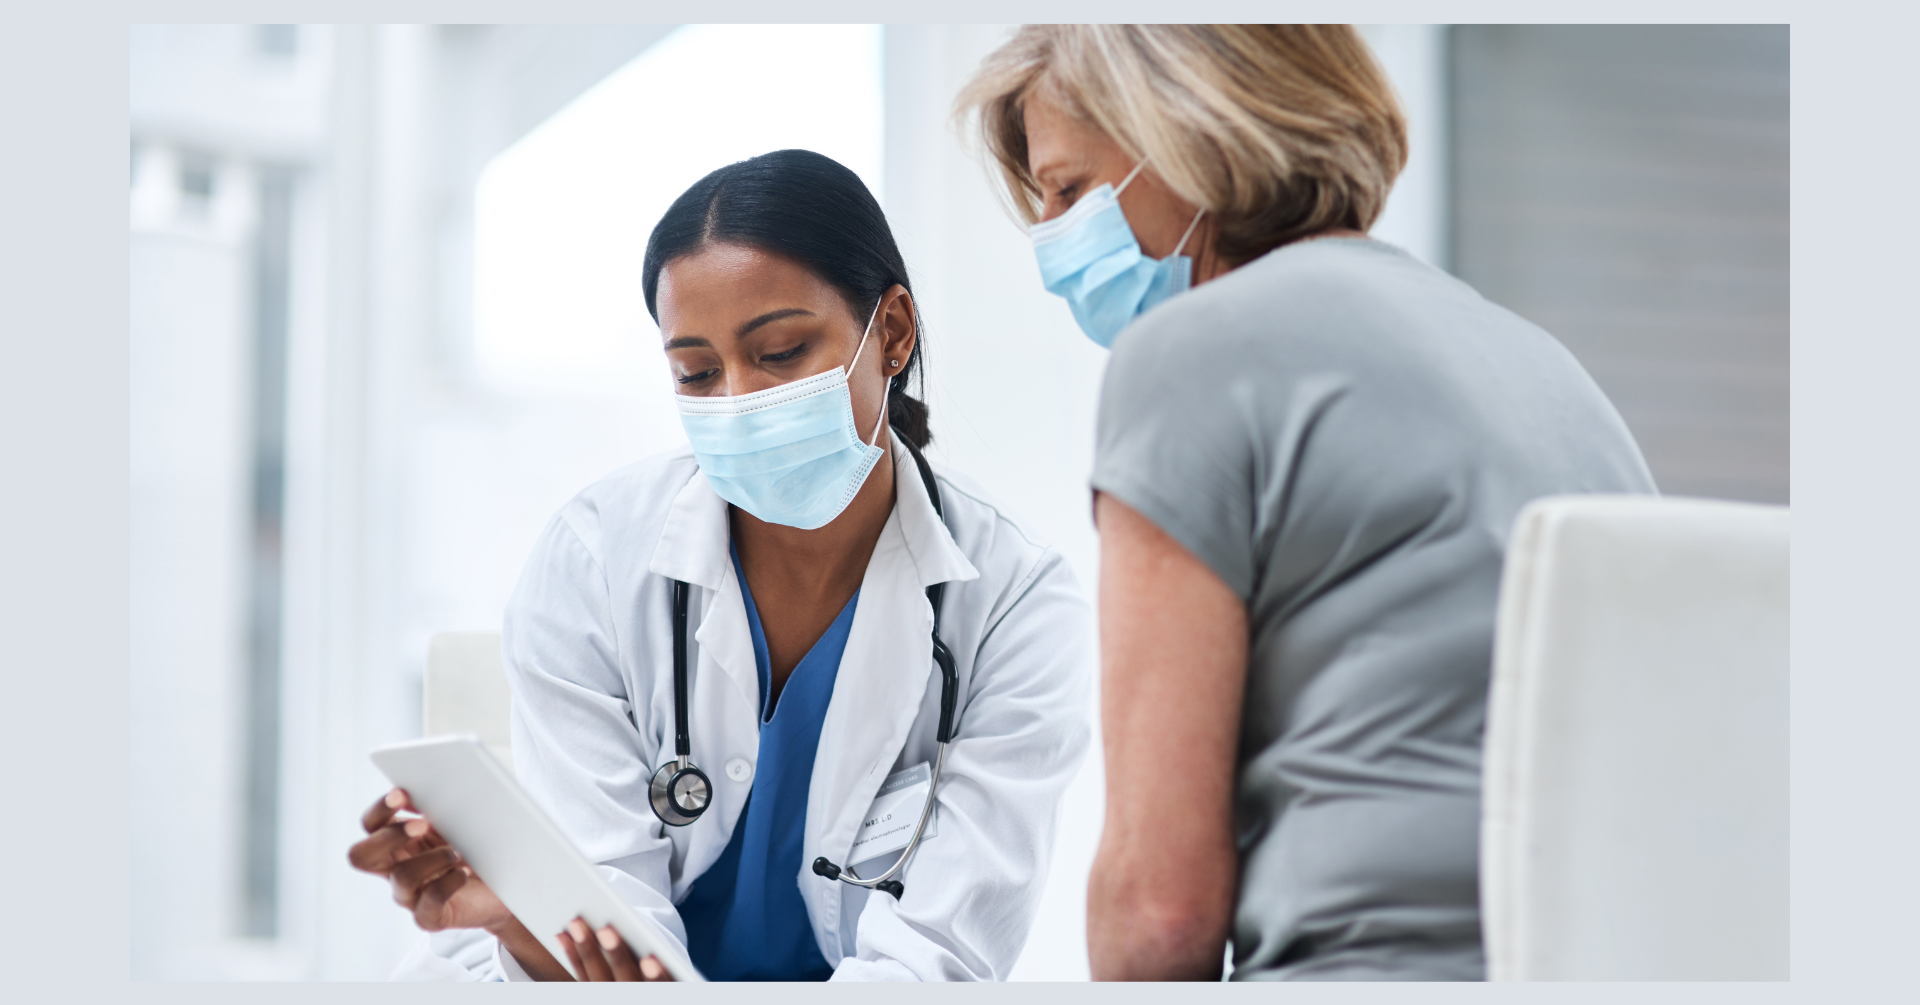 Introductory image: Health Professional and Patient Looking at a Tablet in a Hospital Setting